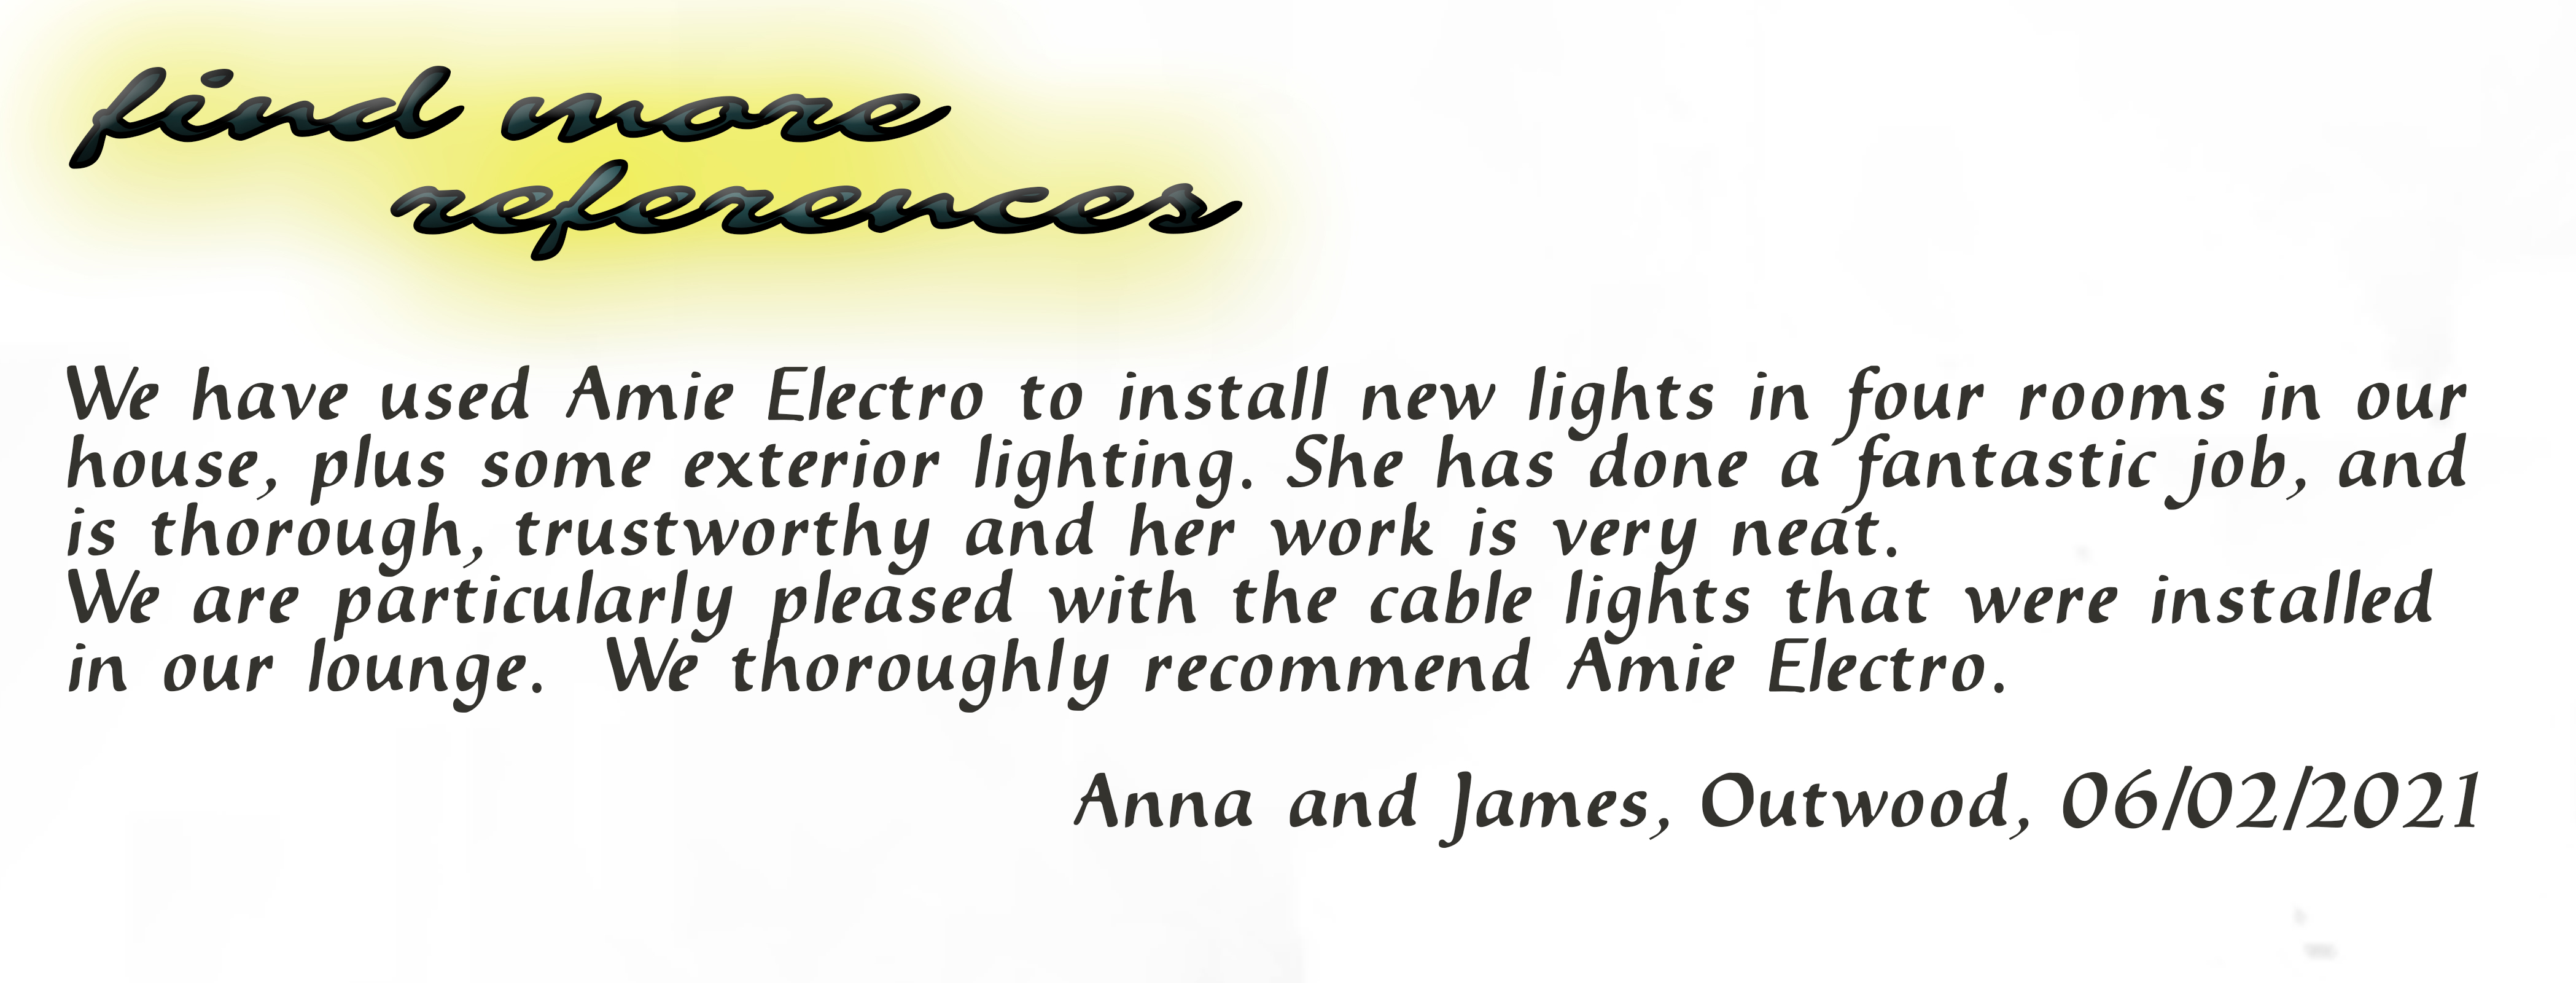 We have used Amie electro to install new lights in four rooms in our house, plus some exterior lighting. She has done a fantastic job, and is thorough, trustworthy and her work is very neat. We are particularly pleased with the cable lights that were installed in our lounge. We thoroughly recommend Amie Electro. Anna and James, Outwood, 06/02/2021